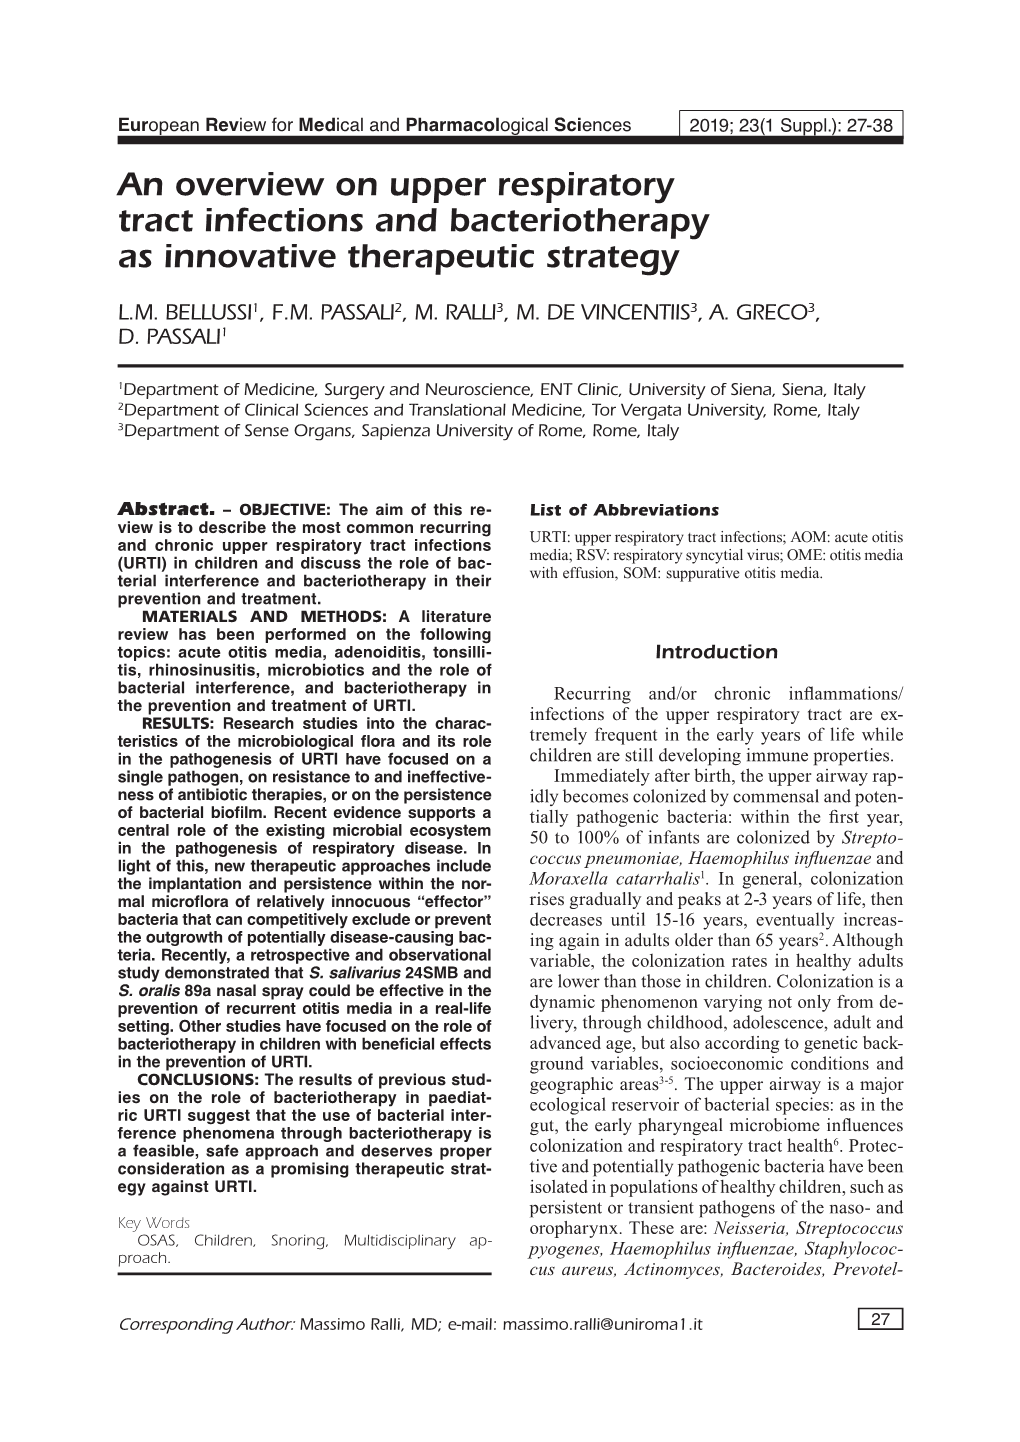 An Overview on Upper Respiratory Tract Infections and Bacteriotherapy As Innovative Therapeutic Strategy